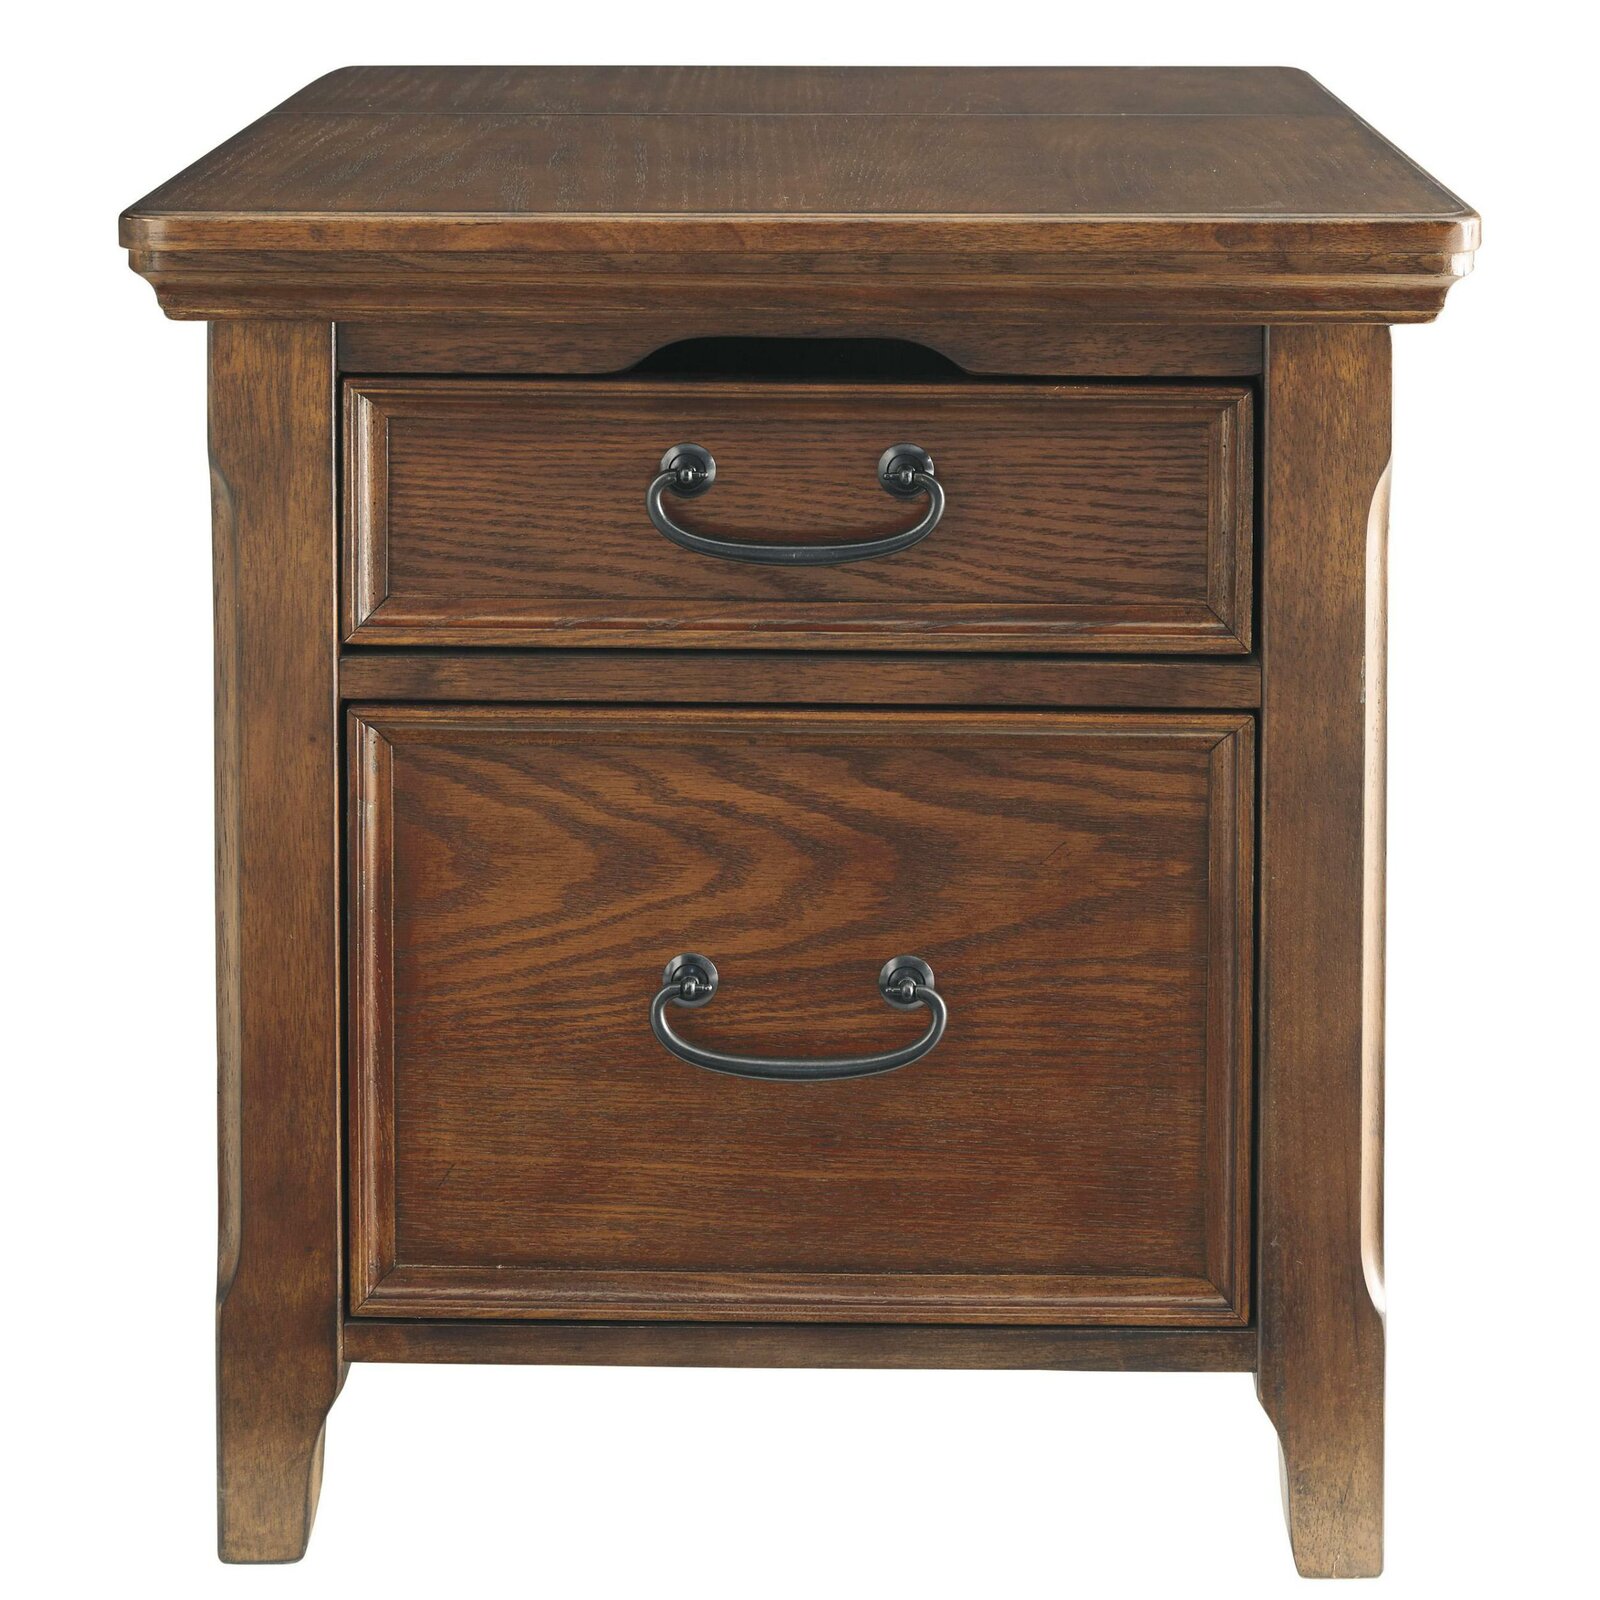 Rosalind Wheeler Neymar 24.88'' Tall End Table with Built-In Outlets